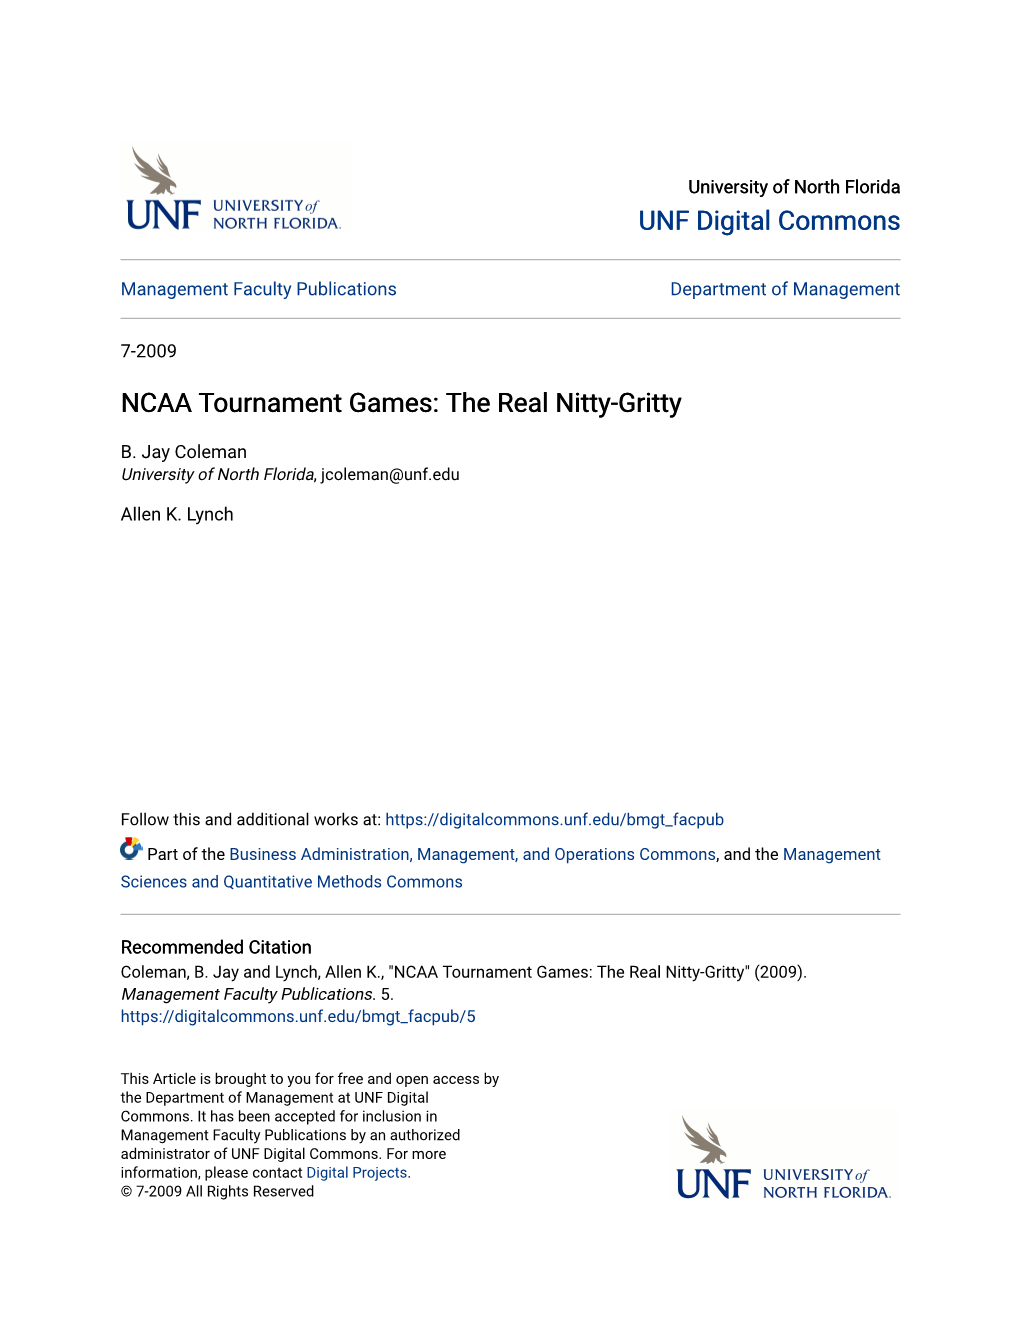 NCAA Tournament Games: the Real Nitty-Gritty